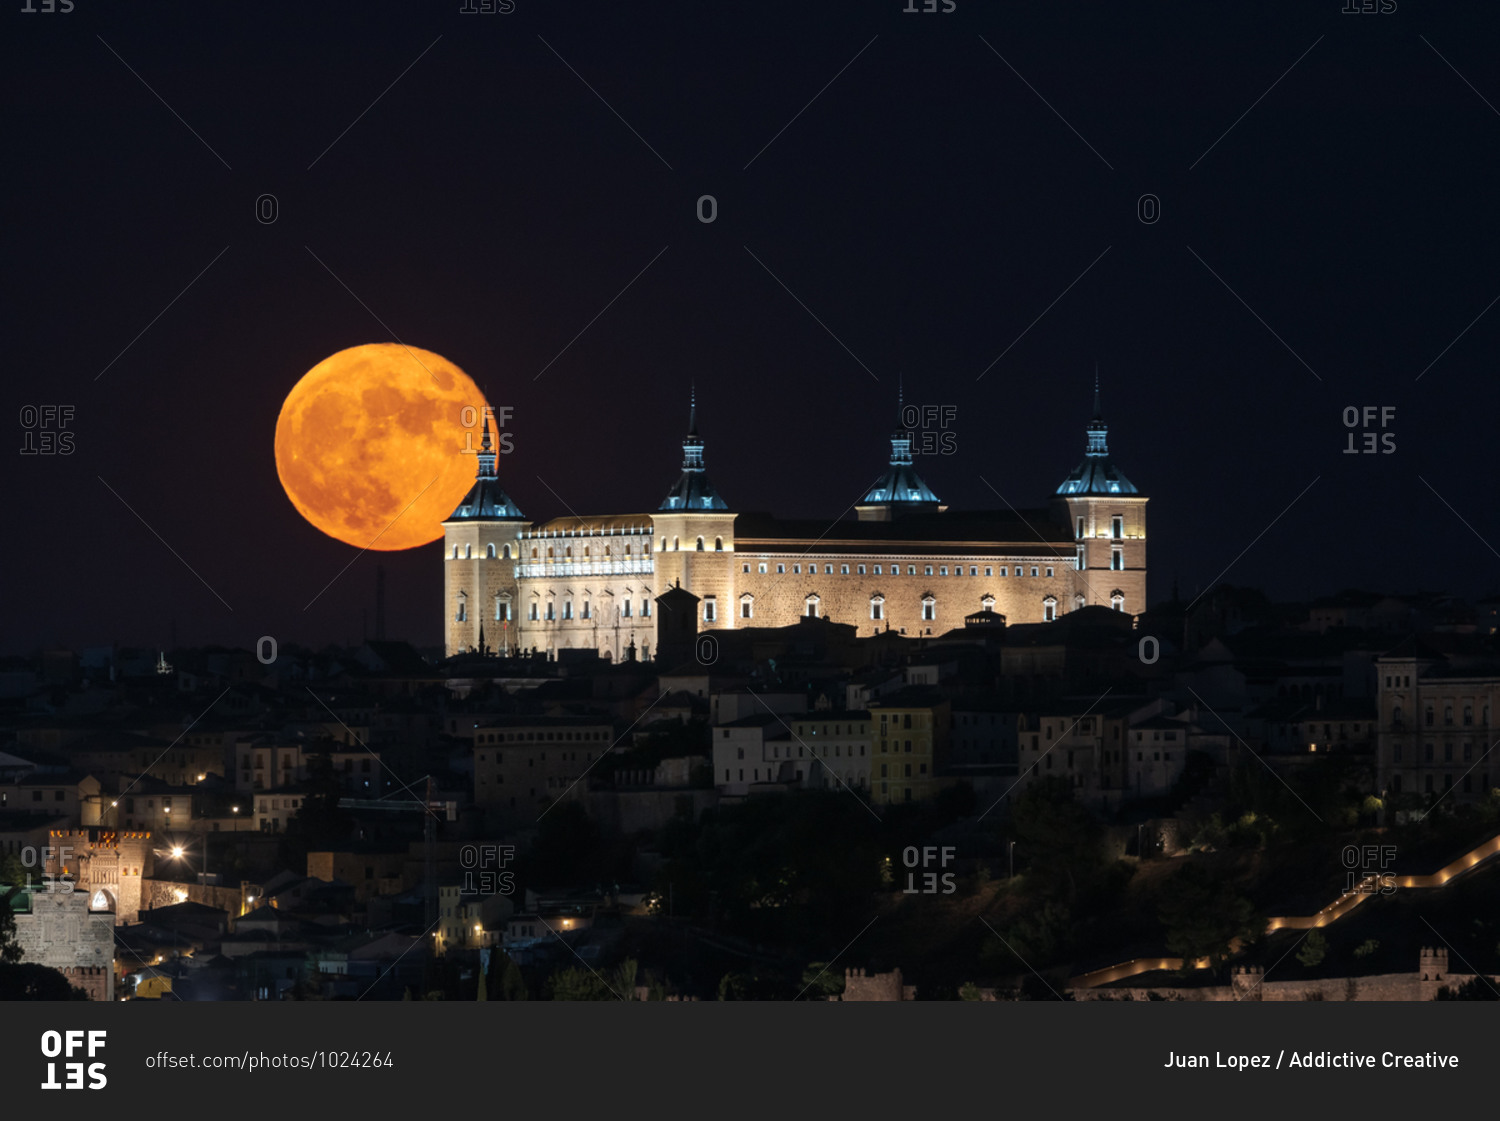 Amazing view of bright full moon in dark night sky over old town with glowing historical palace